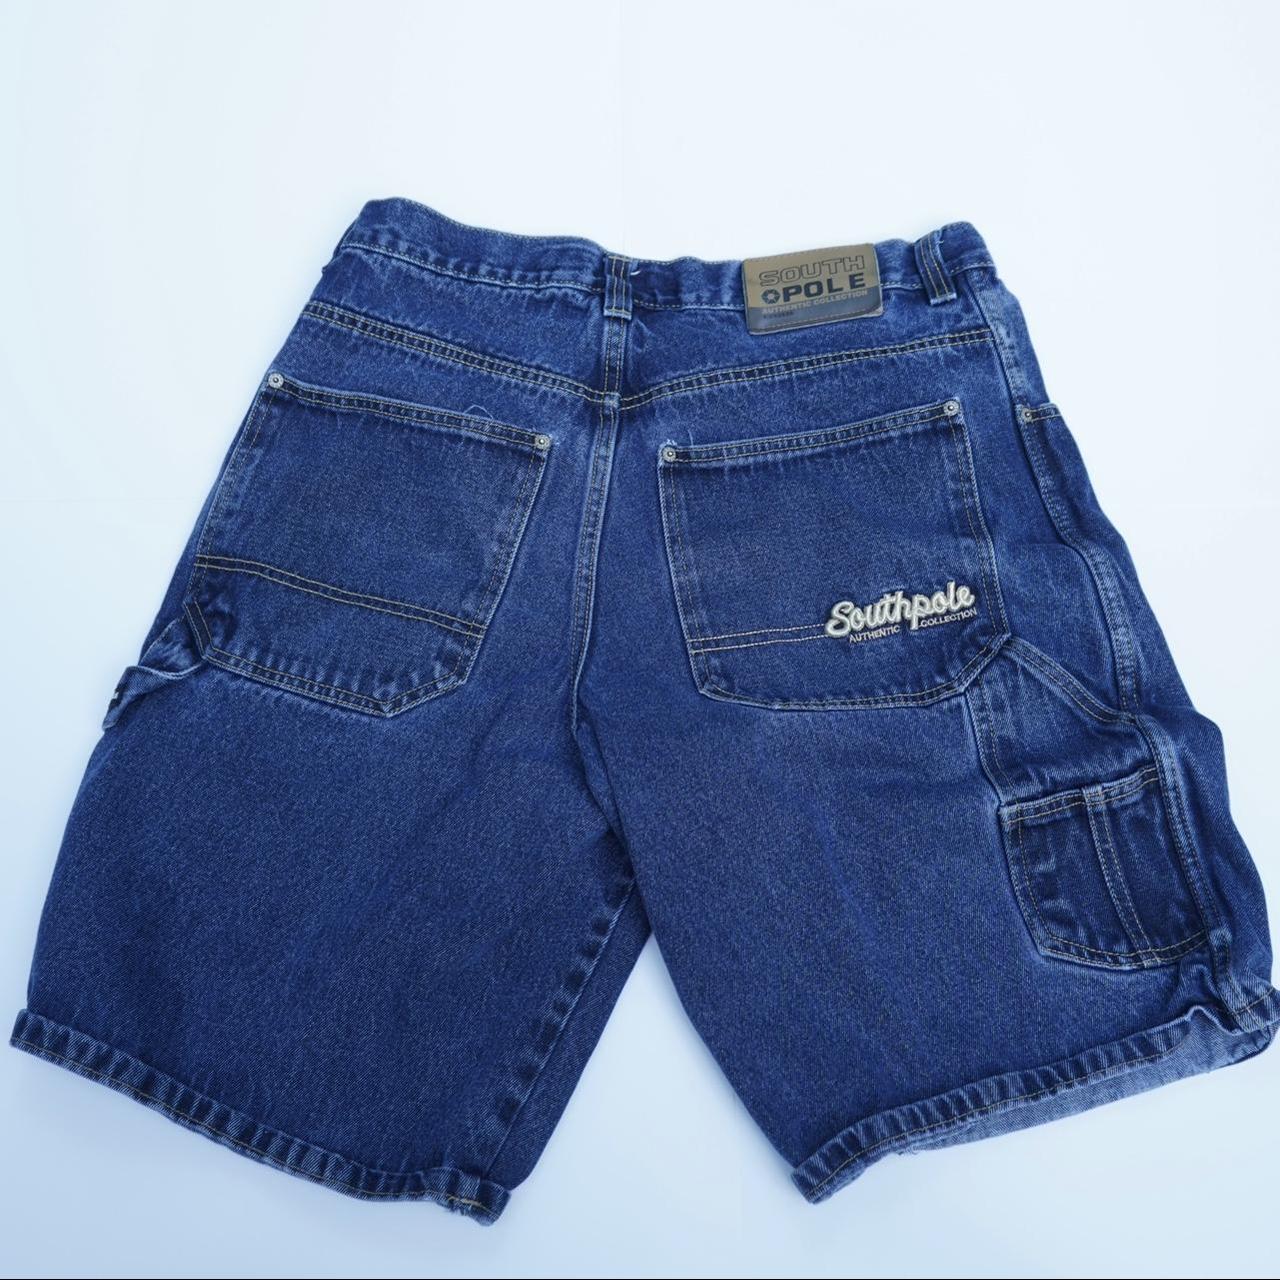 South Pole Embroidered Jorts Size 36 Send Offers... - Depop